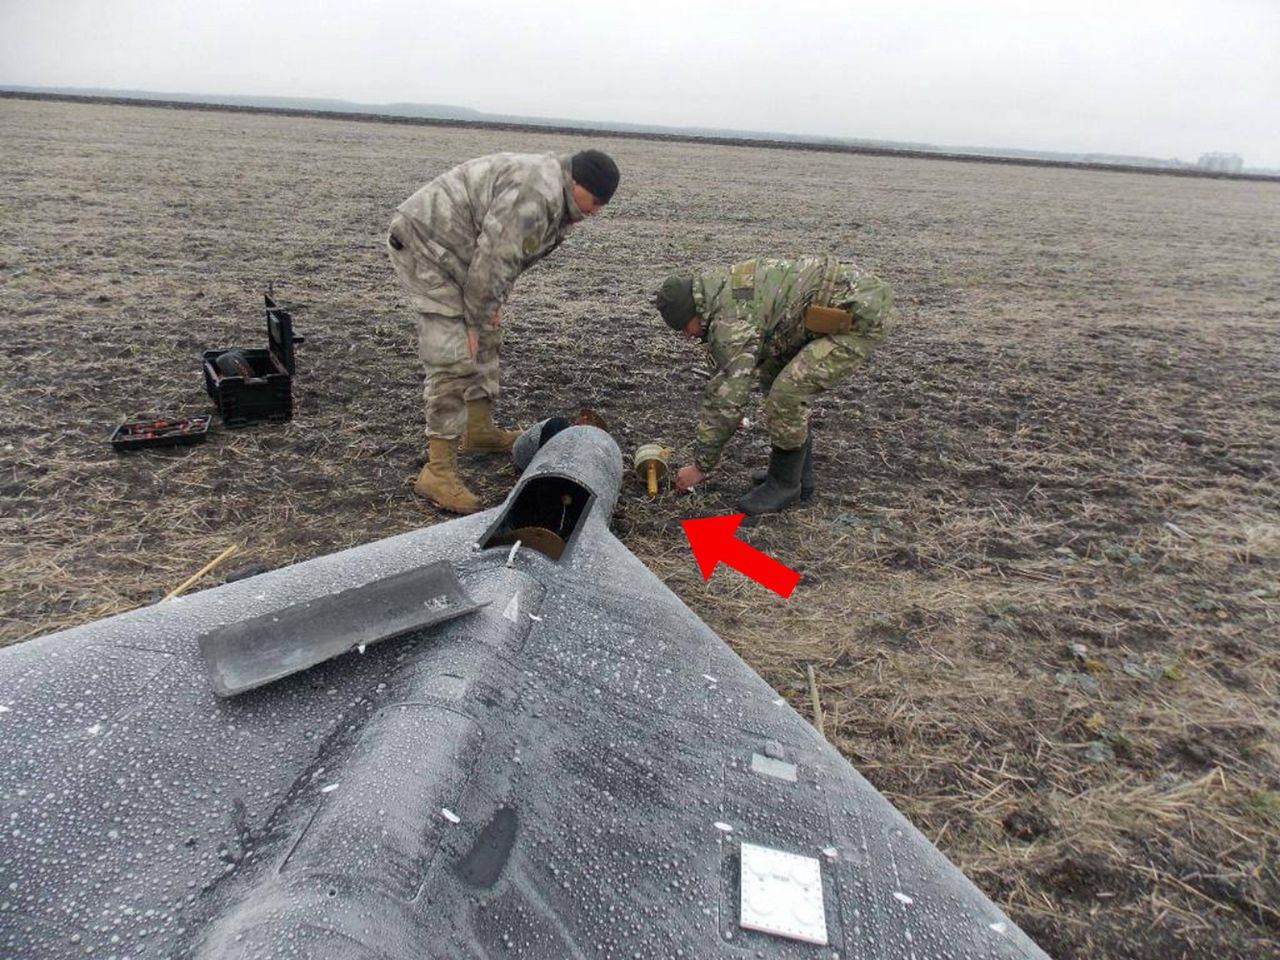 The Russian Shahed-136 drone found in Ukraine in a new version